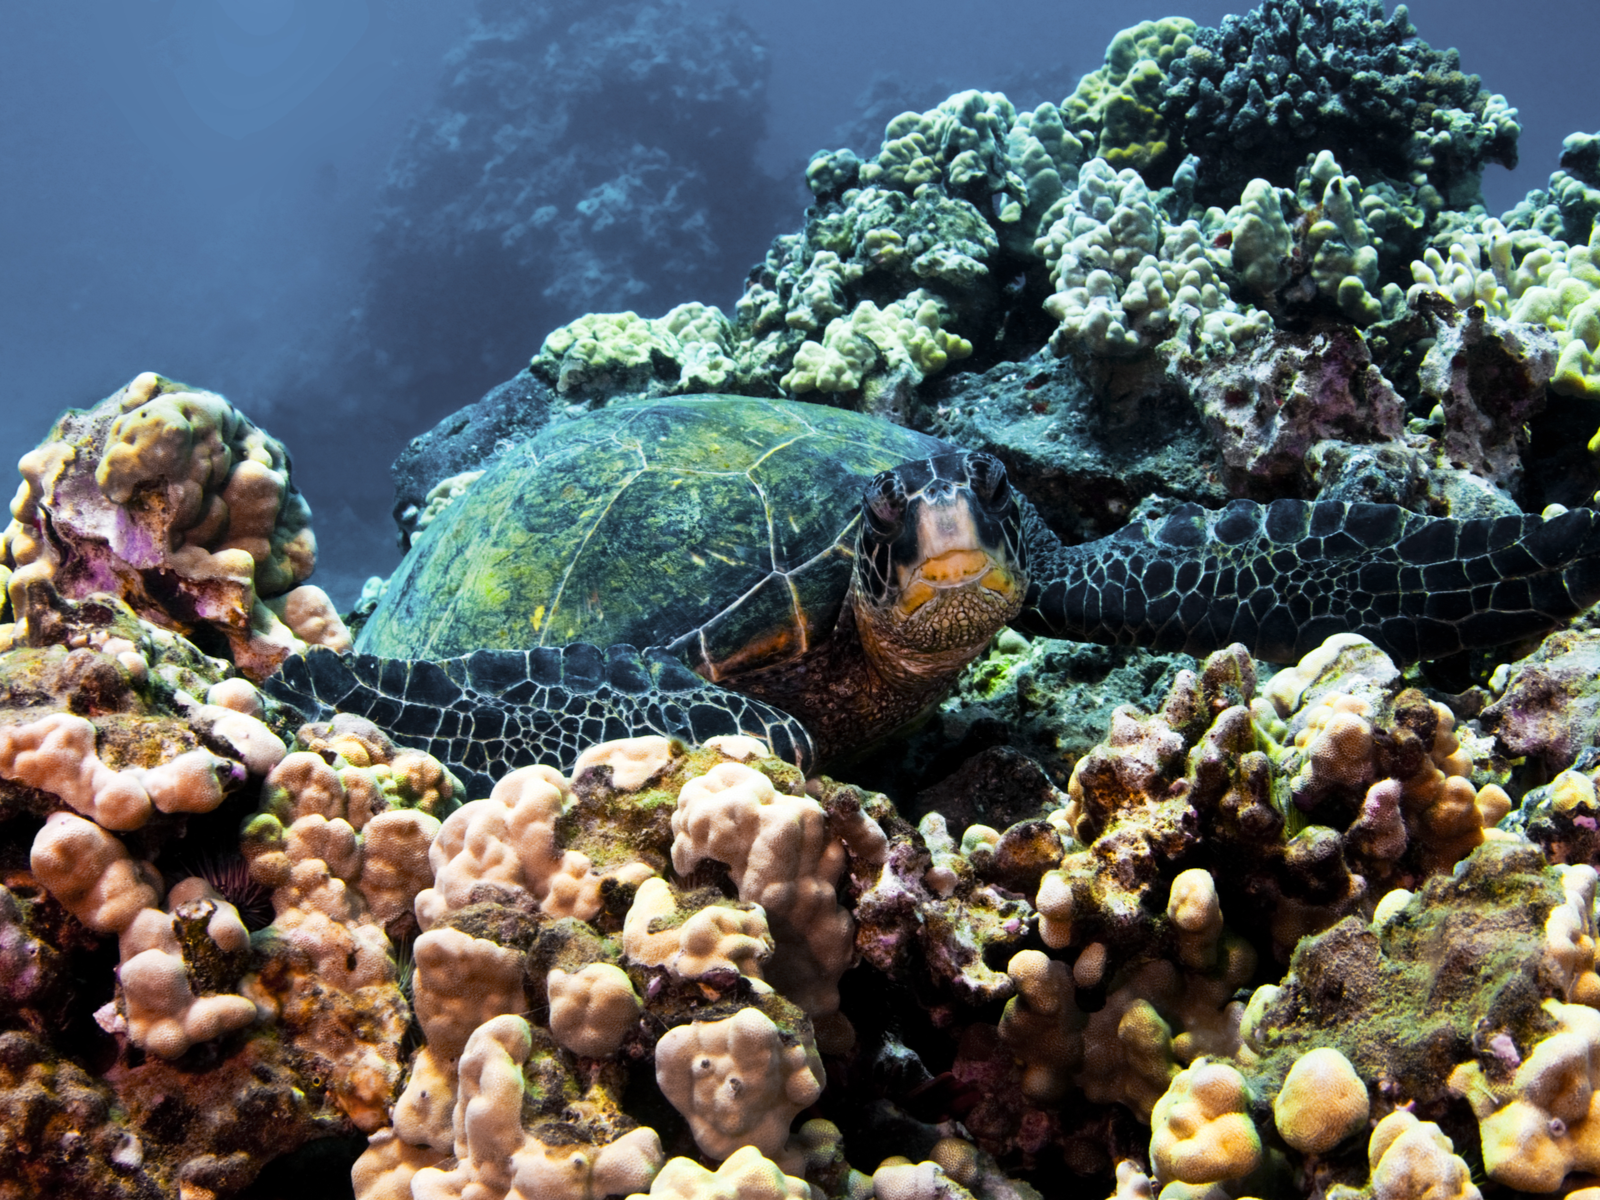 A Green Turtle nestled on coral reefs at Turtle Town, a pick on the best snorkeling spots in Hawaii